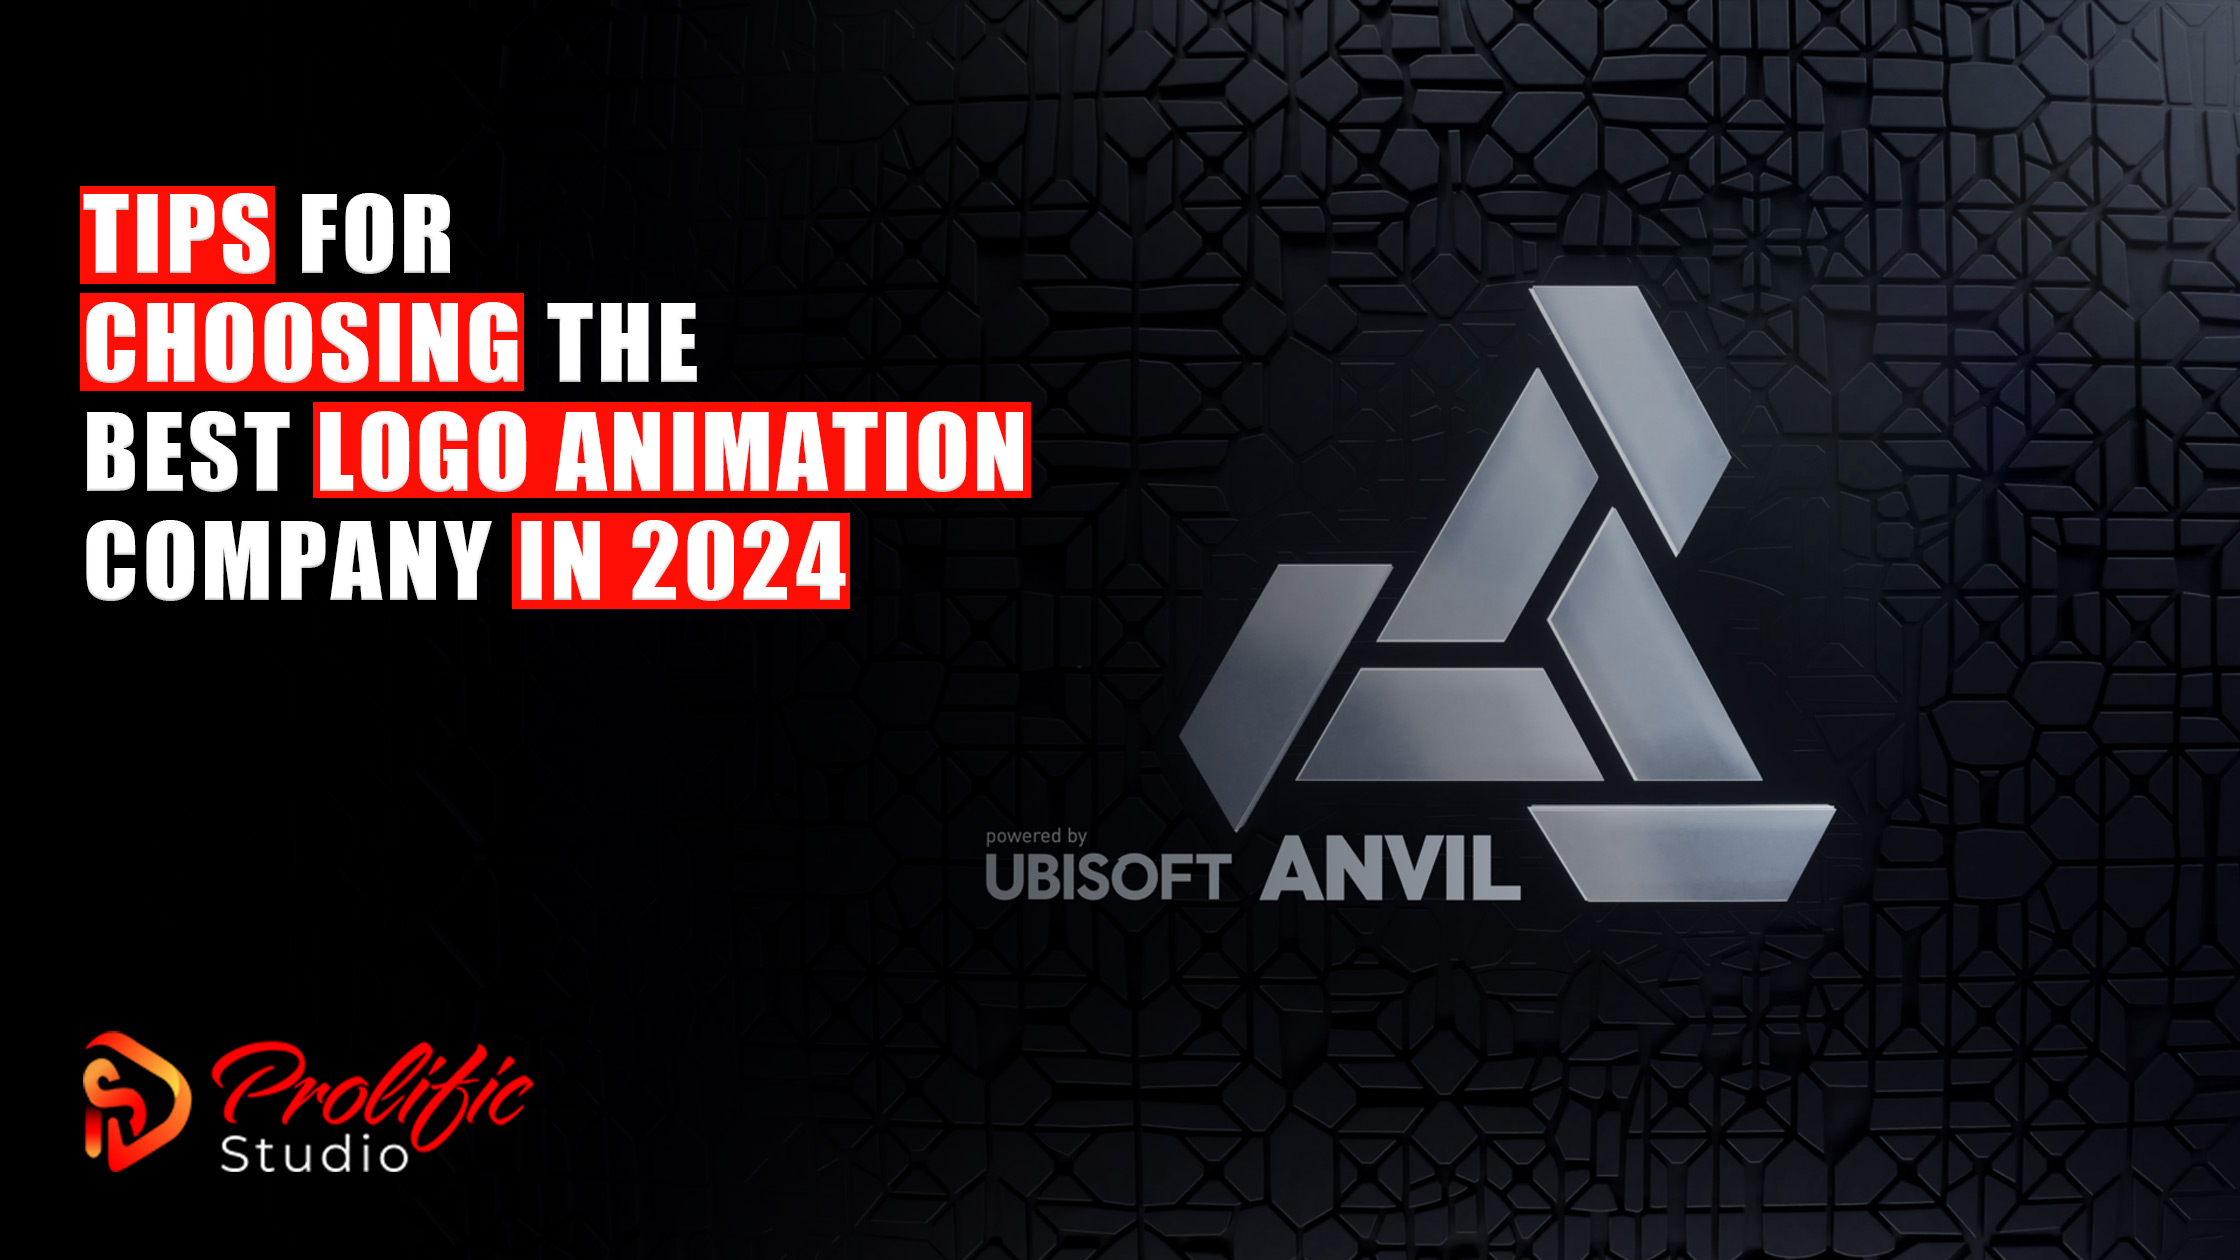 Tips for Choosing the Best Logo Animation Company in 2024